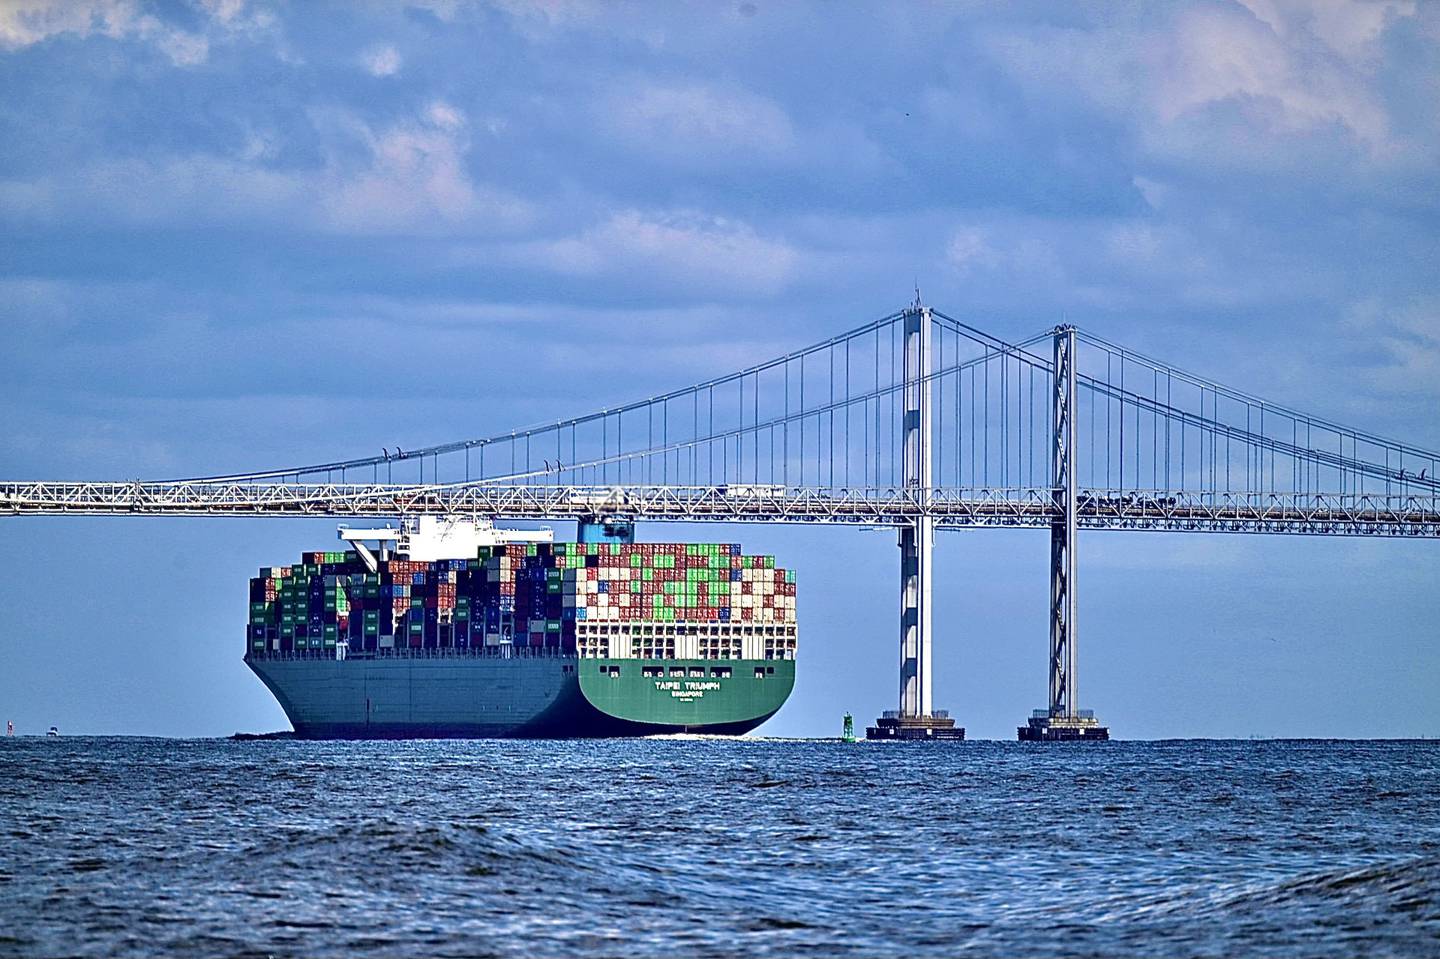 The Taipei Triumph, a 7-year-old container ship out of Singapore, passing underneath the Chesapeake Bay Bridge